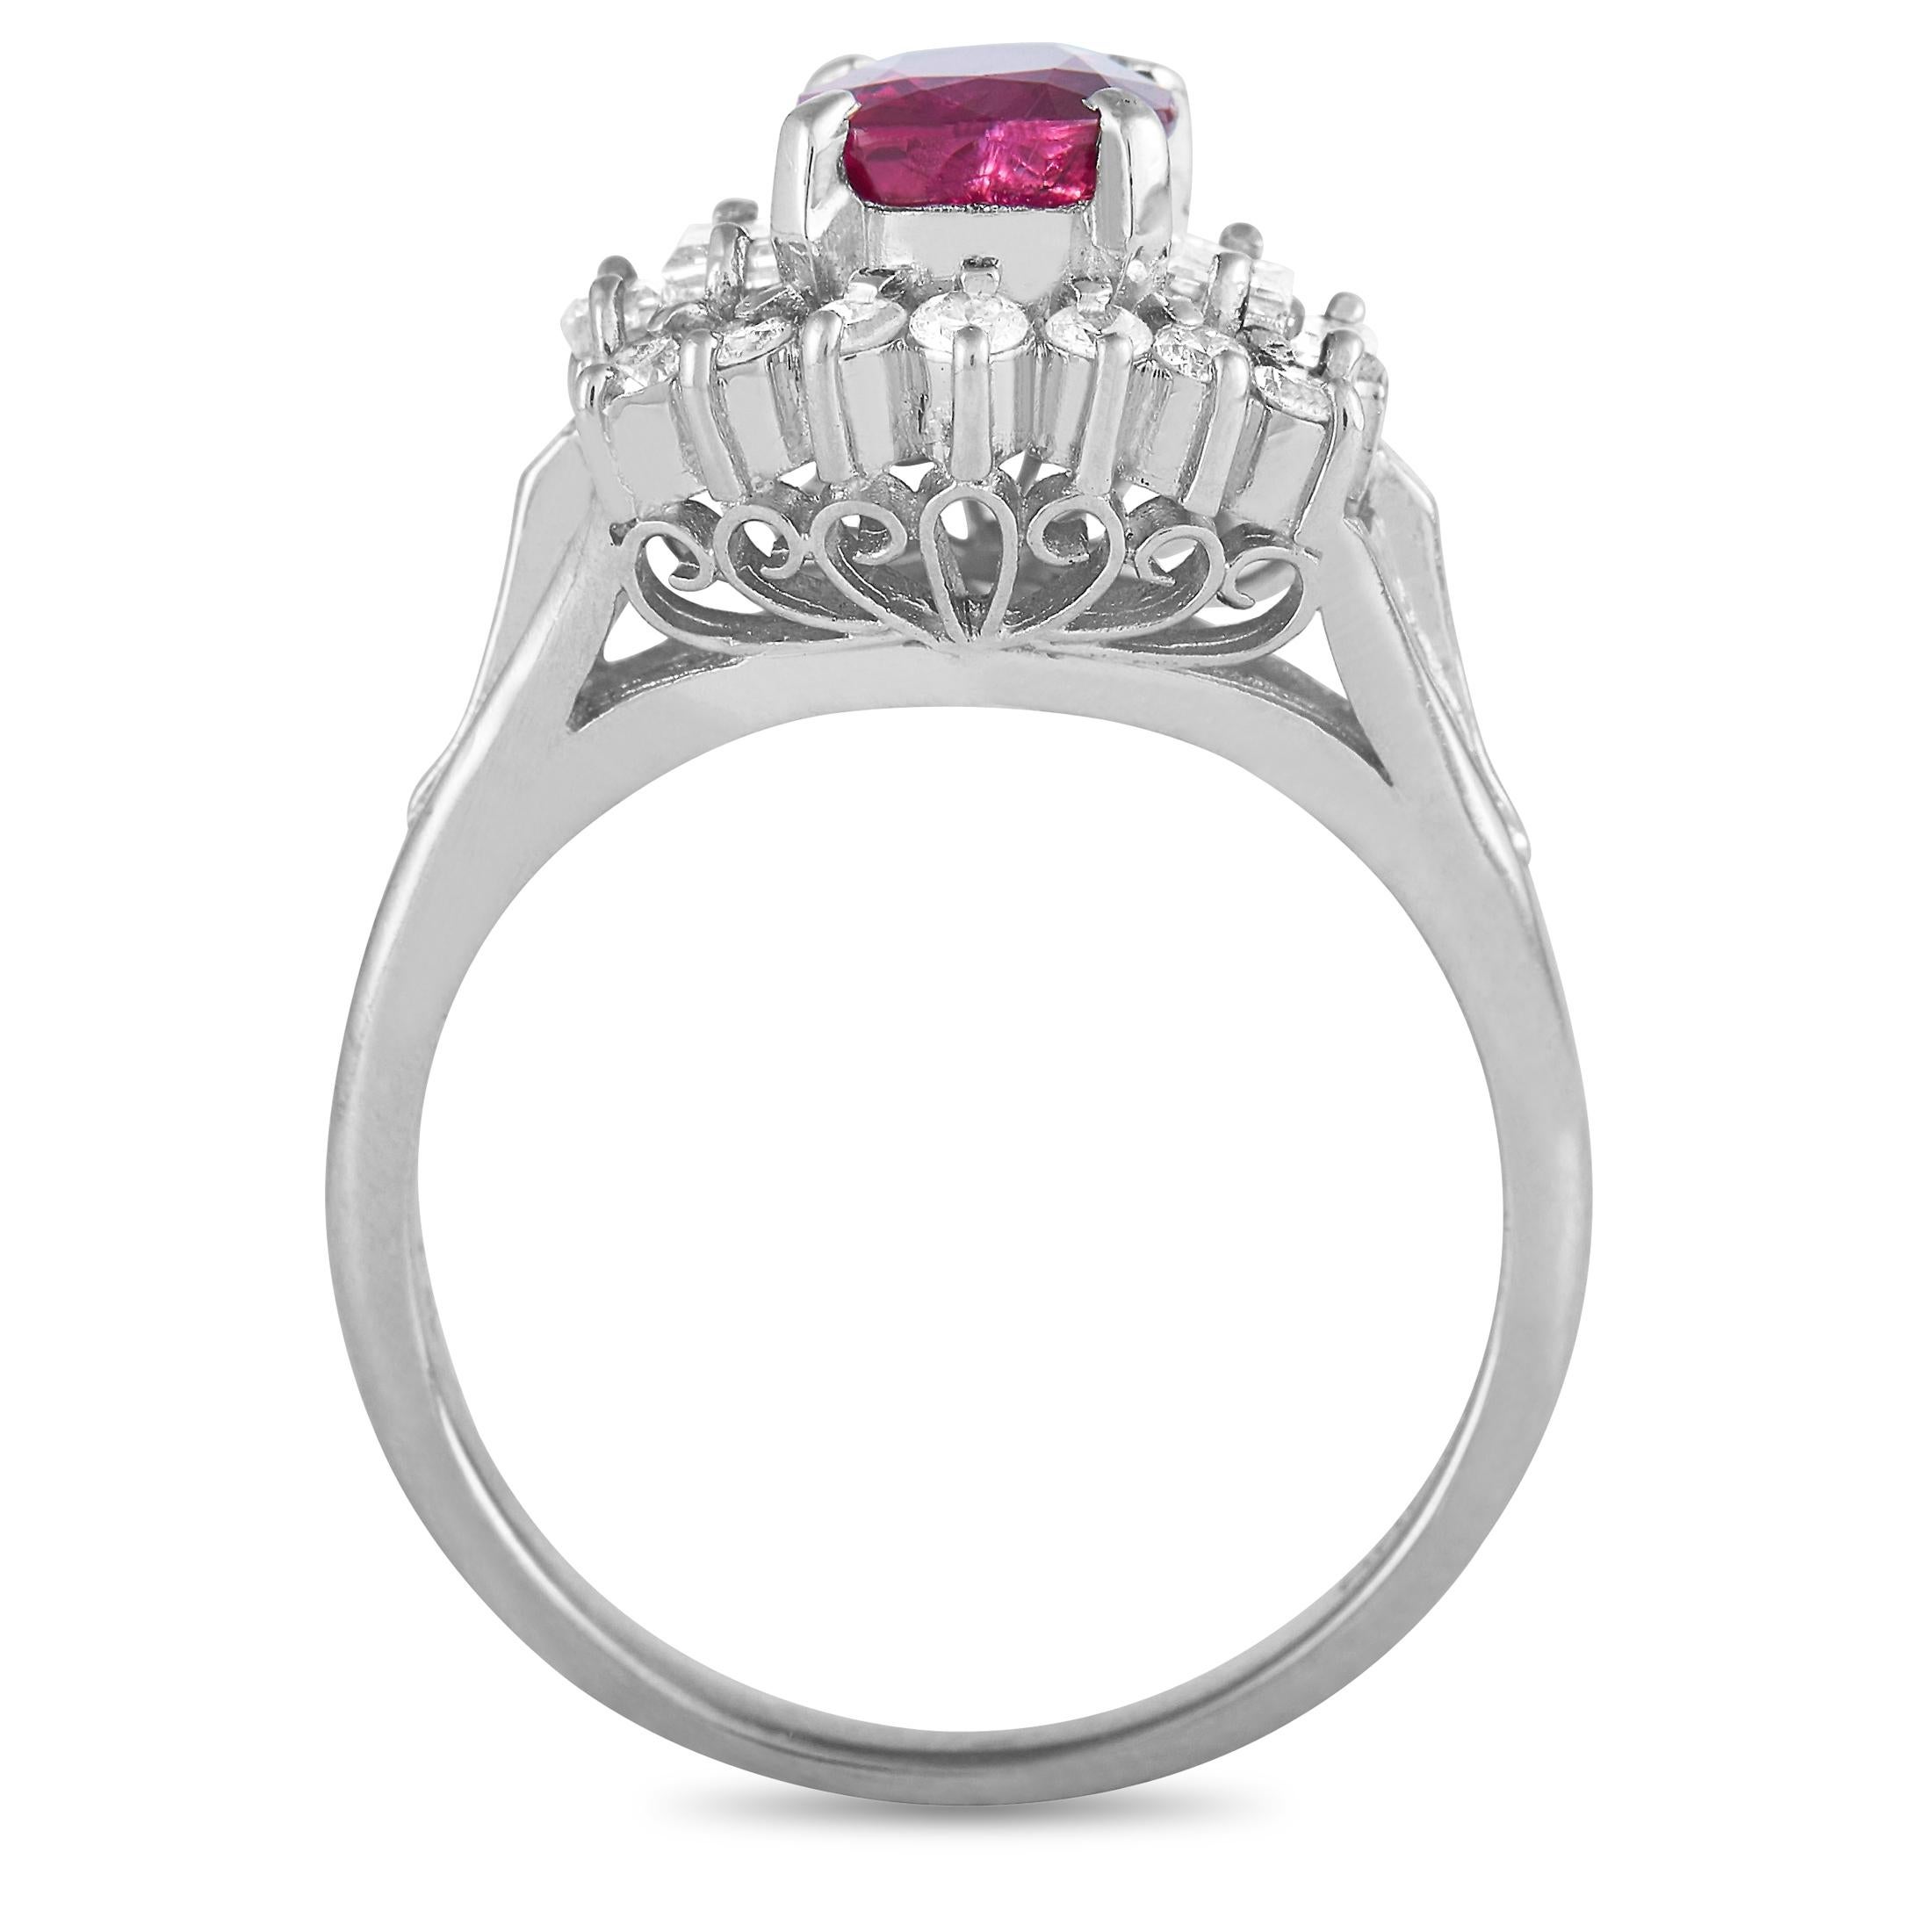 This LB Exclusive ring is crafted from platinum and weighs 6.3 grams. It boasts band thickness of 2 mm and top height of 8 mm, while top dimensions measure 11 by 11 mm. The ring is set with a 1.04 ct ruby and a total of 0.45 carats of diamonds.
 
